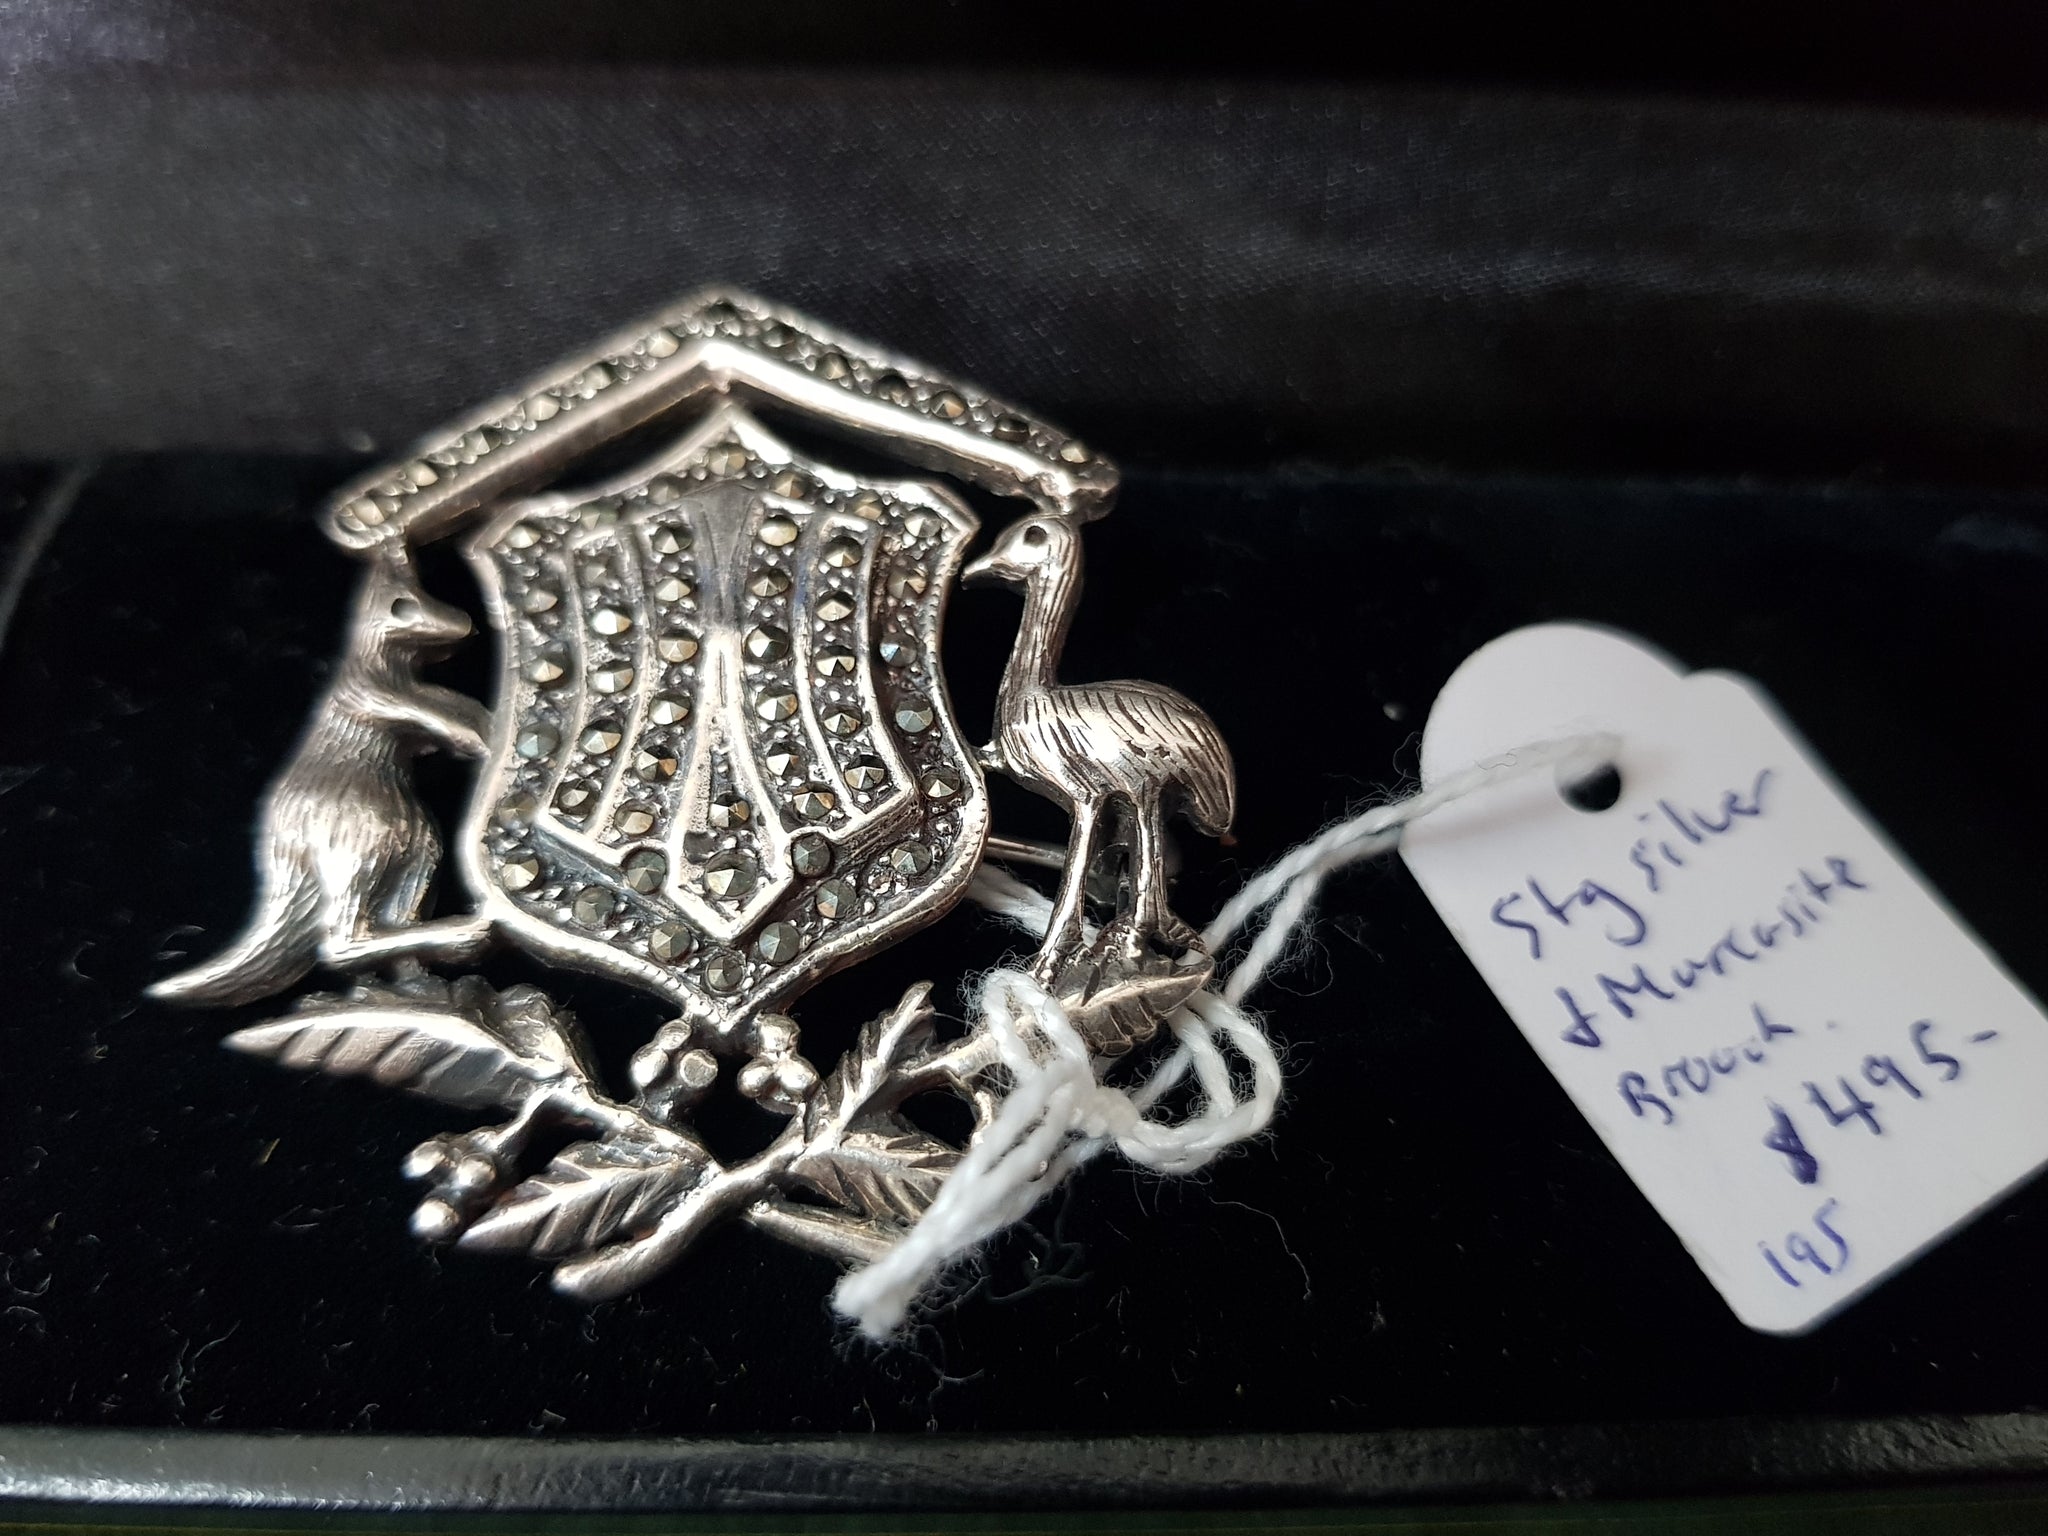 c1960-70 Sterling Silver and Marcasite brooch #195